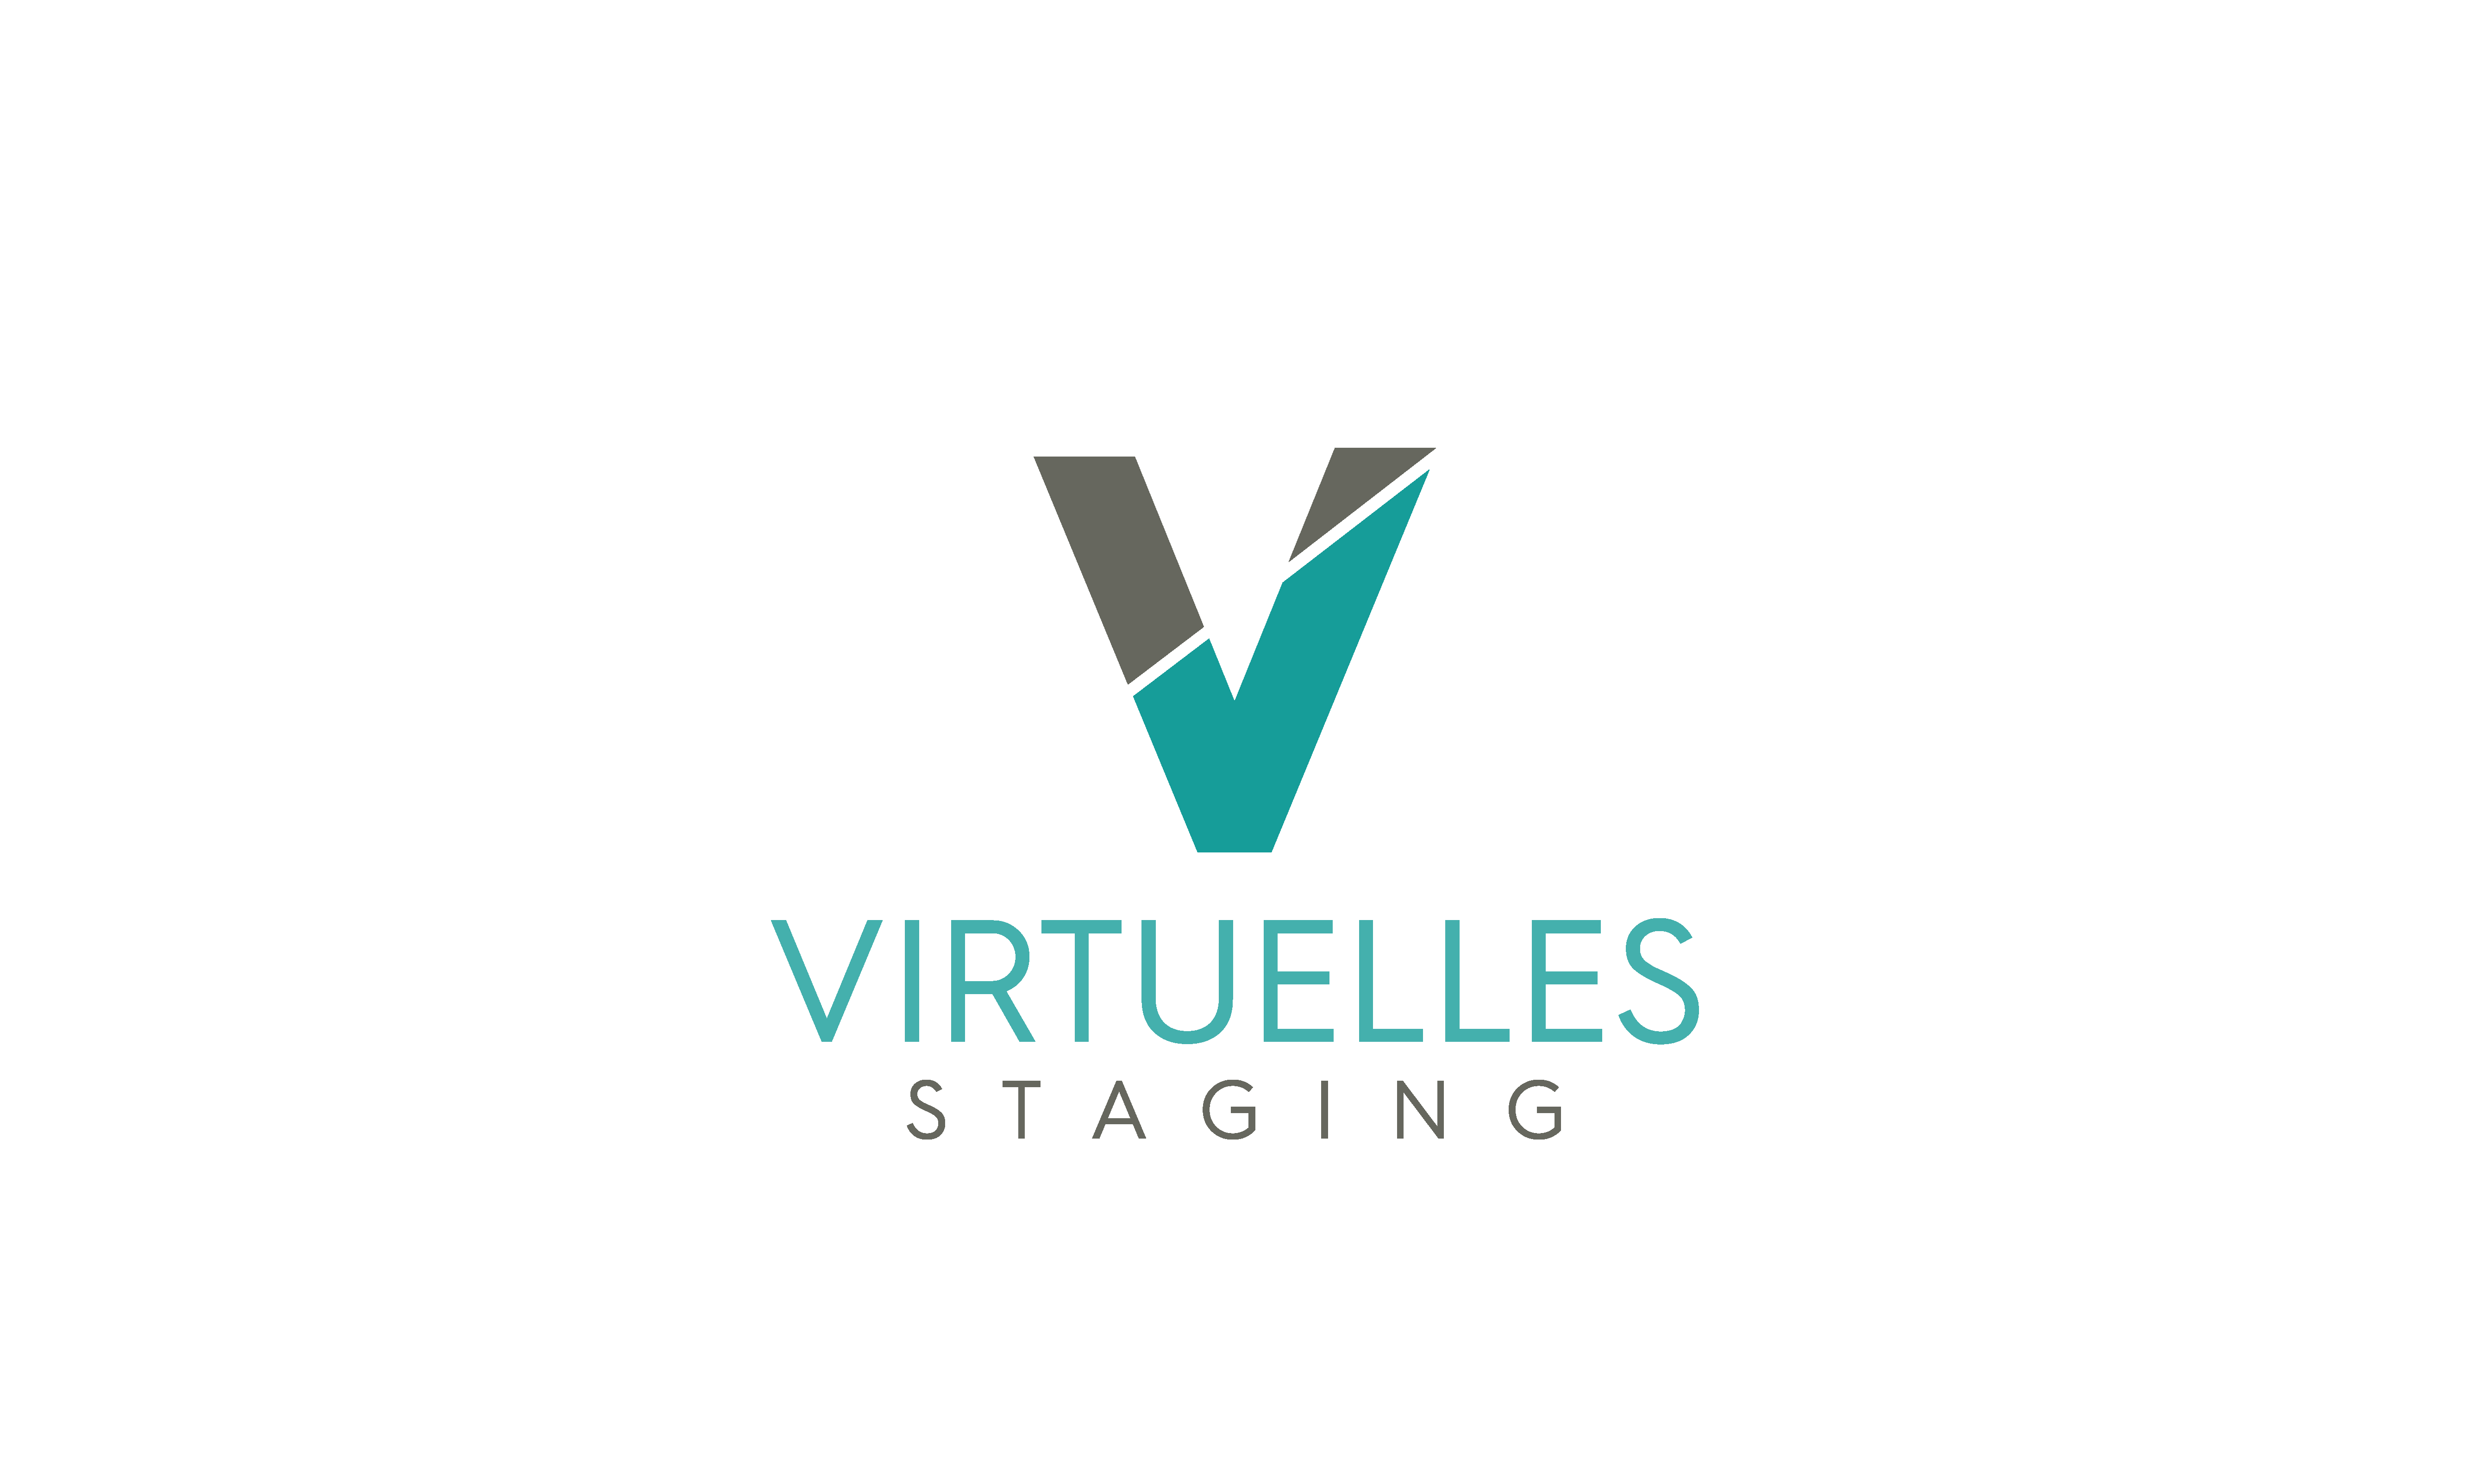 Virtuelles Staging